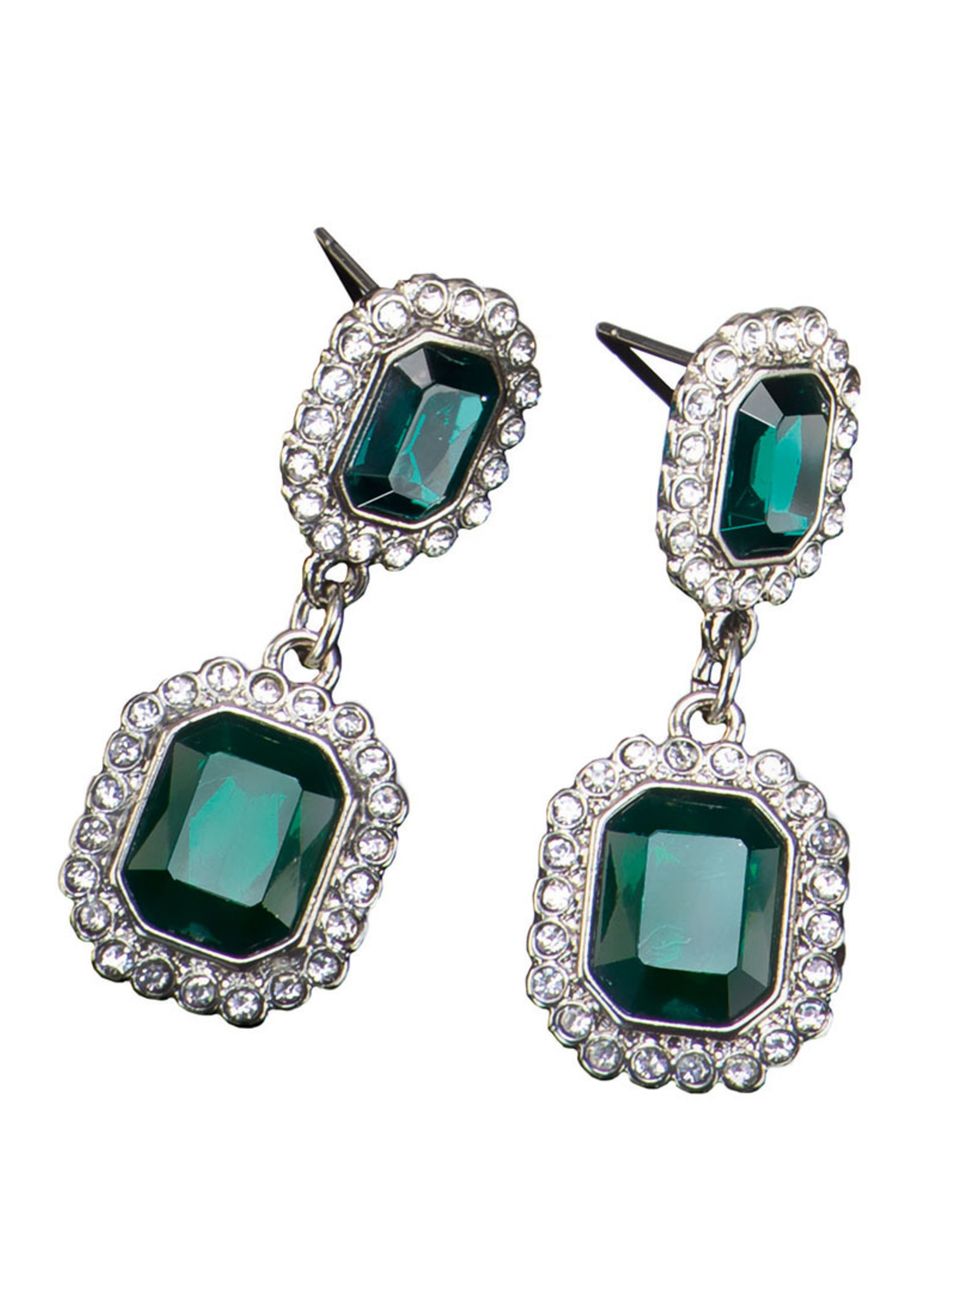 <p>Treat yourself to this classic style now and these will last you for seasons to come.</p>

<p>Camielle earrings, £8, from <a href="http://avonshop.co.uk/product/jewellery-and-fashions/earrings/camile-radiant-cut-earings.html" target="_blank">Avon</a>.<